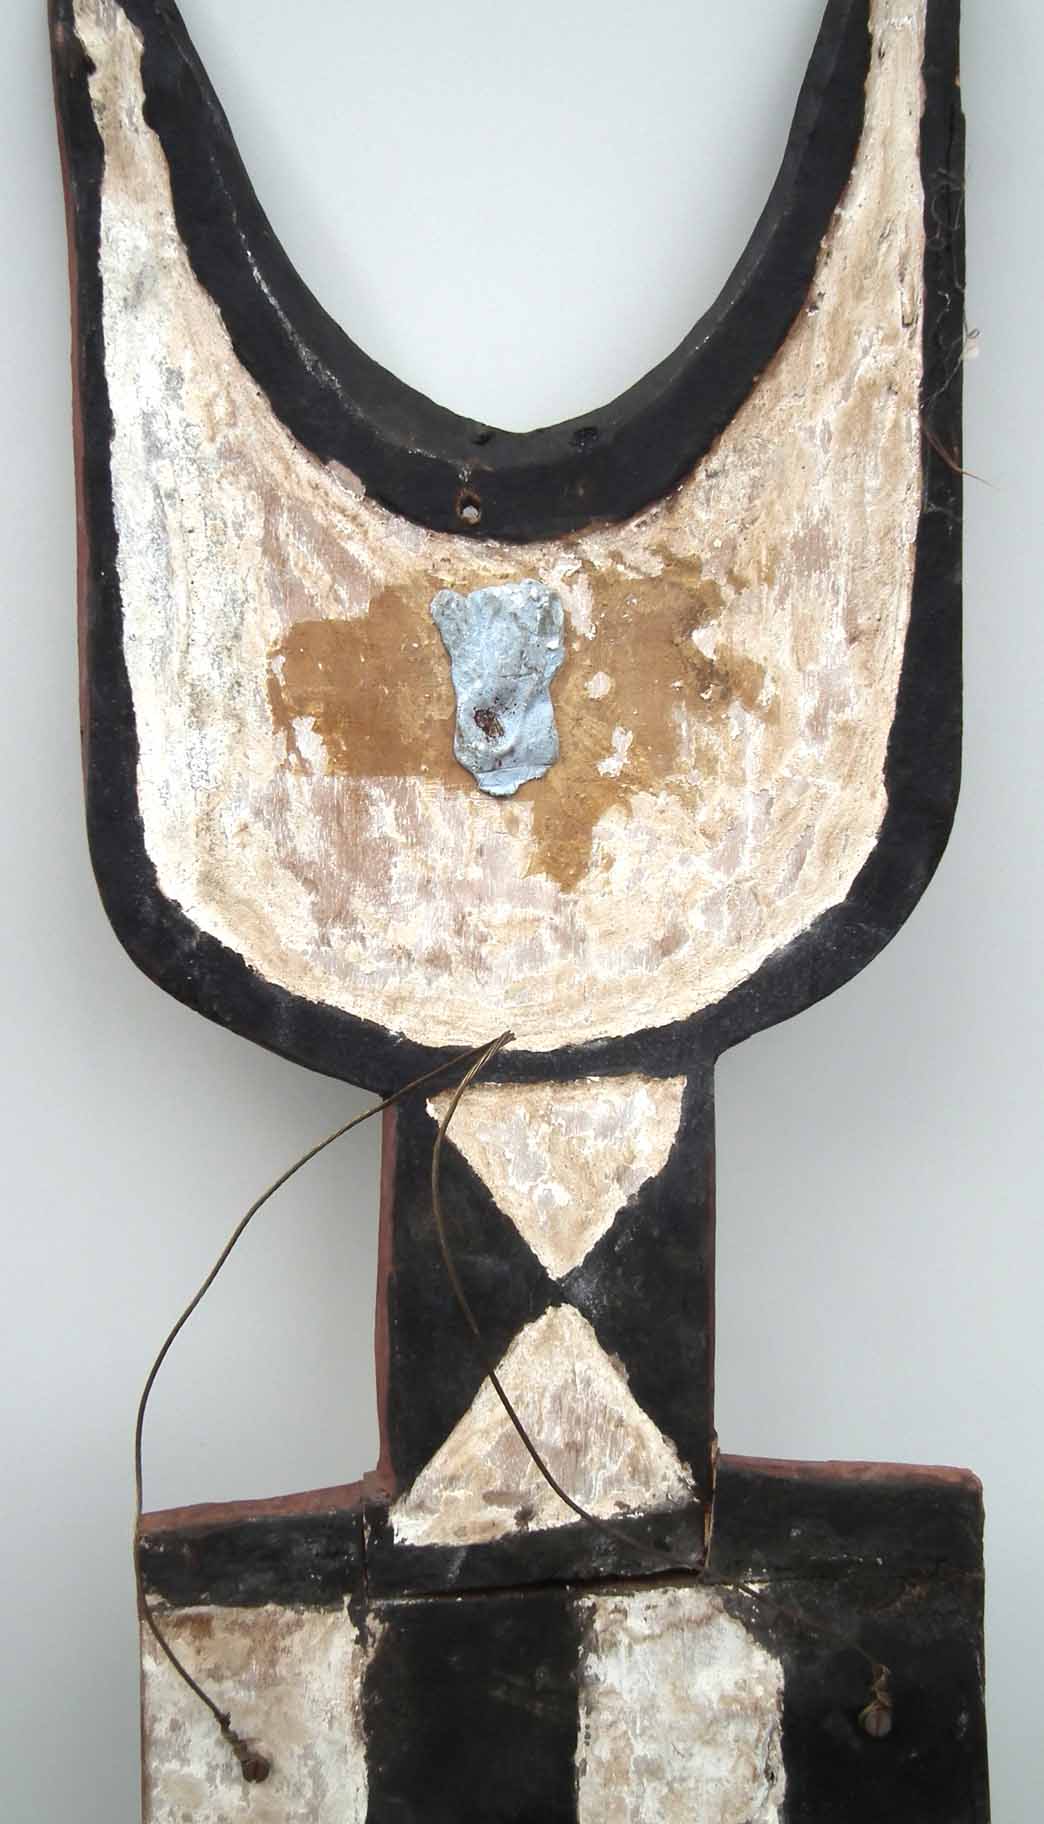 Bobo Bwa plank mask fron Hounde area of Burkina Faso, wood, pigment and fibres, 147cm high excluding - Image 10 of 13